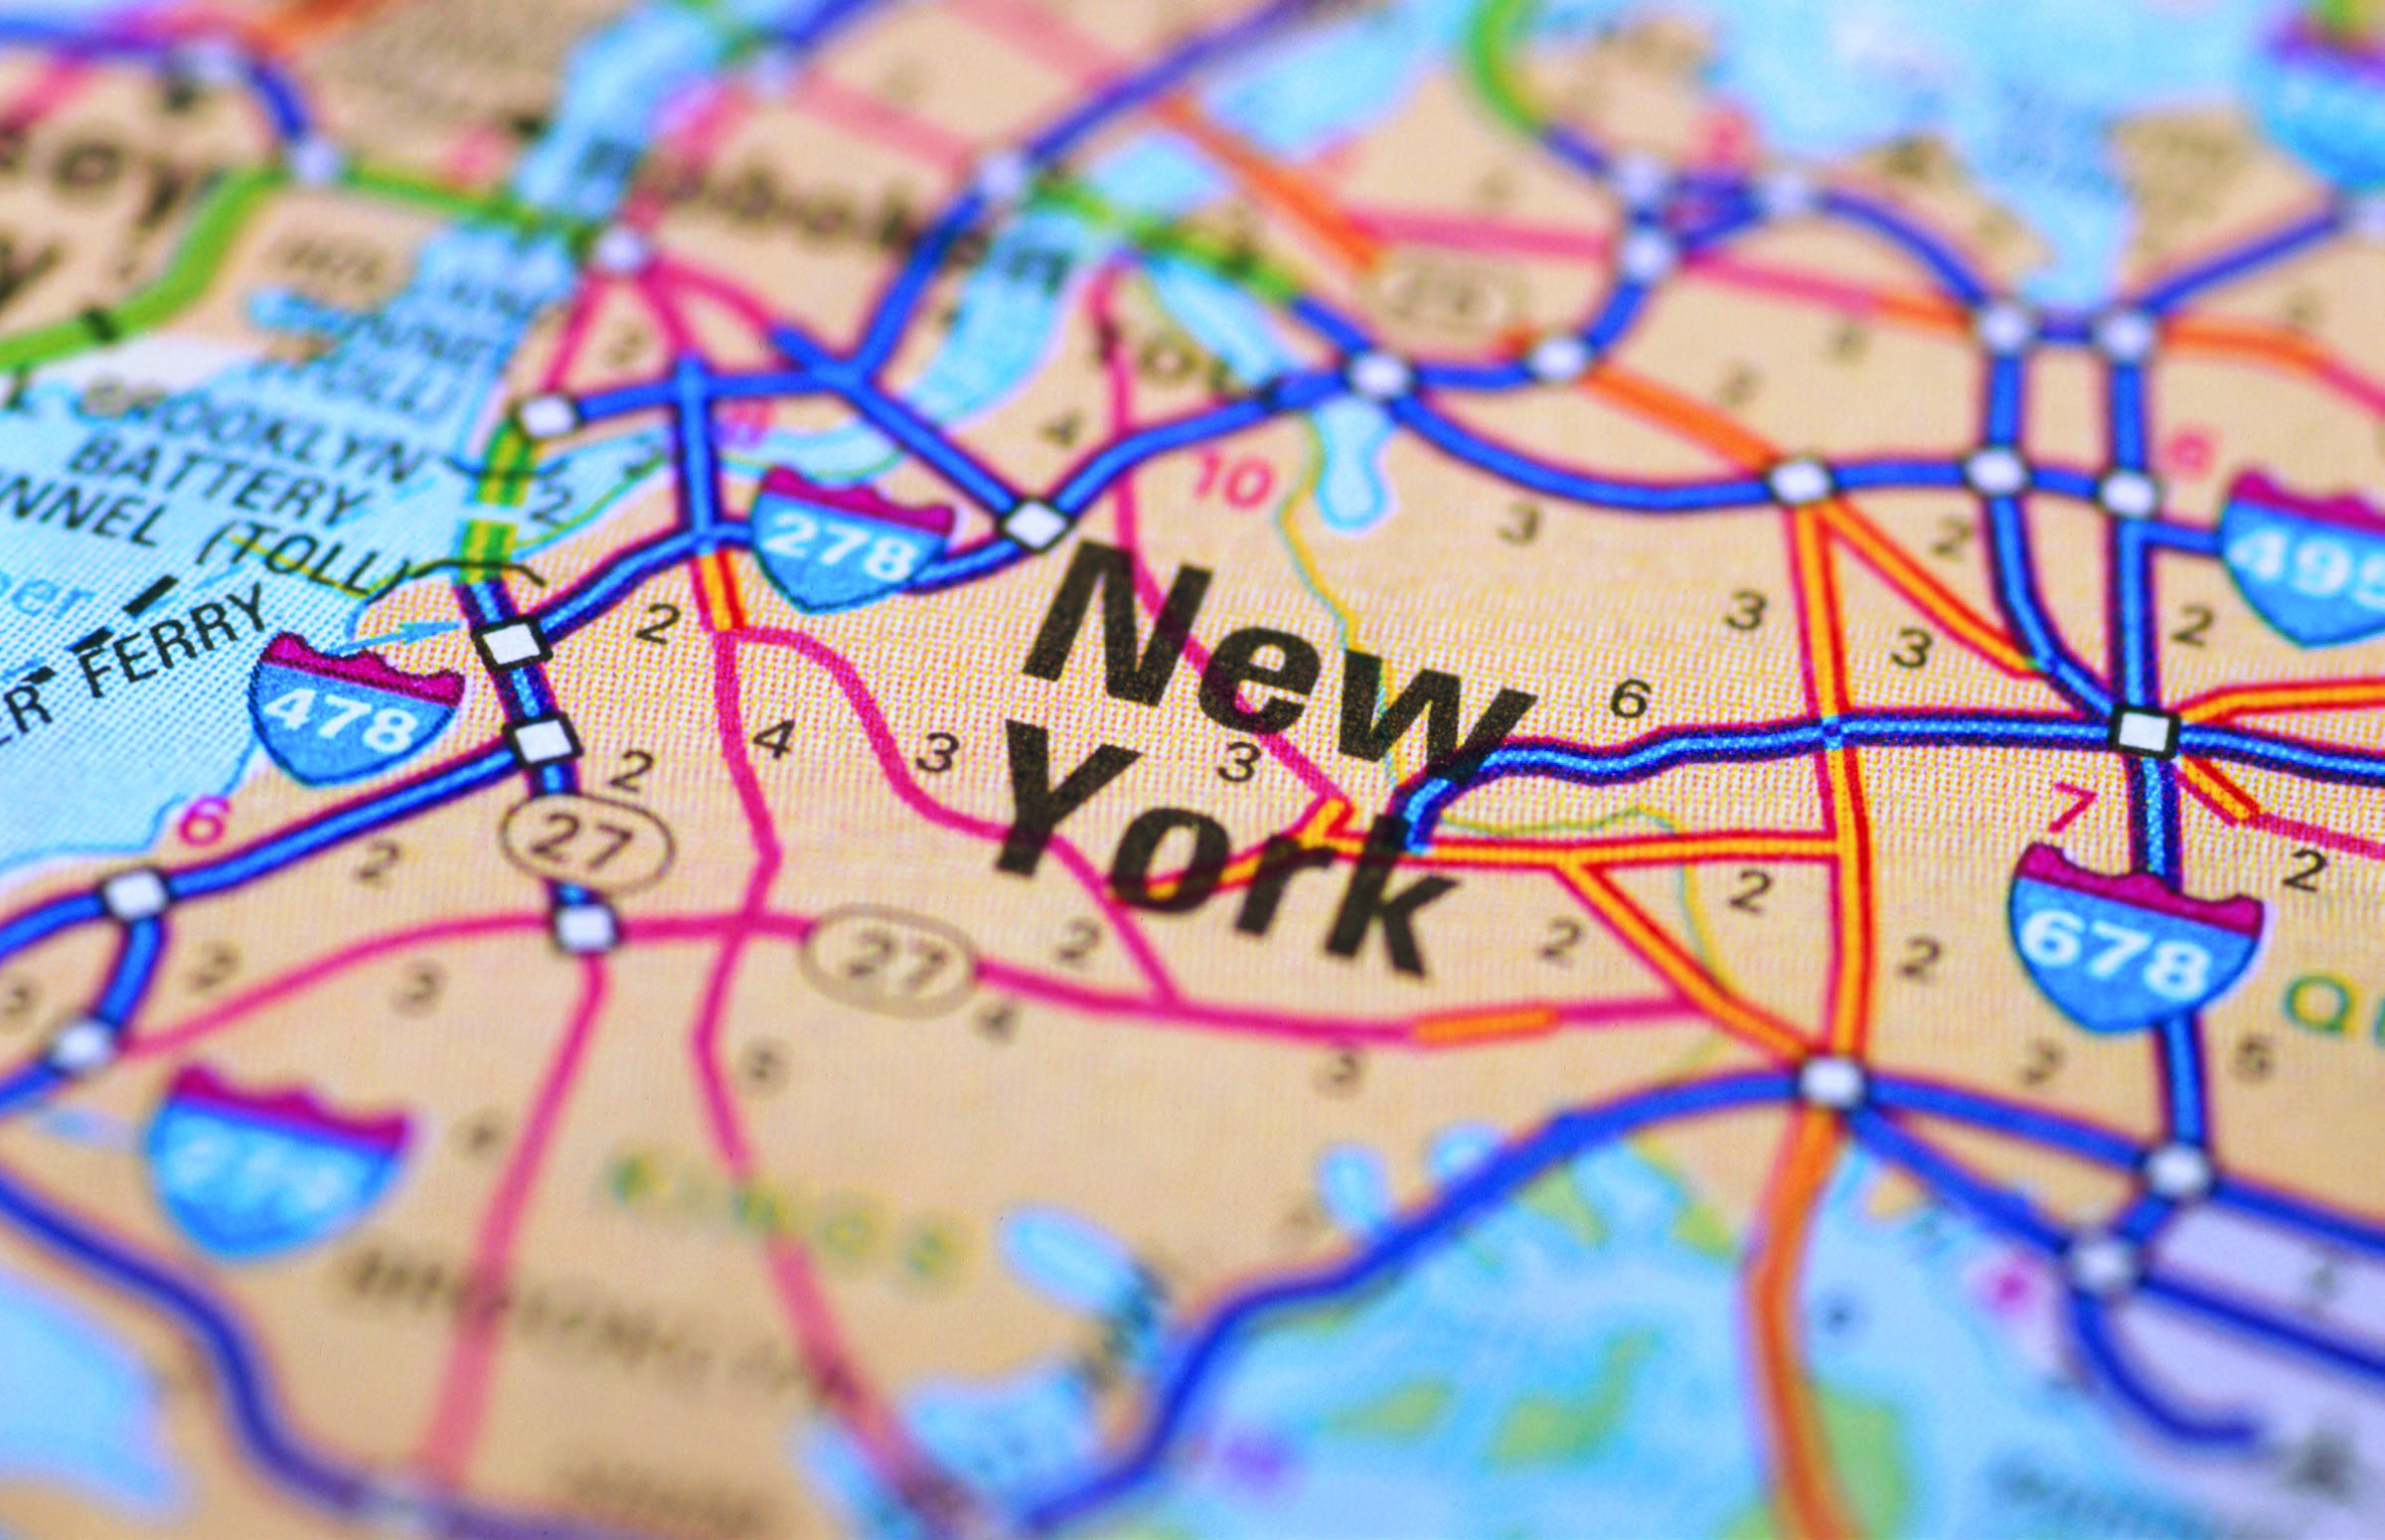 New York Map photo - Travel Tips | Travel Advice from Travel Experts